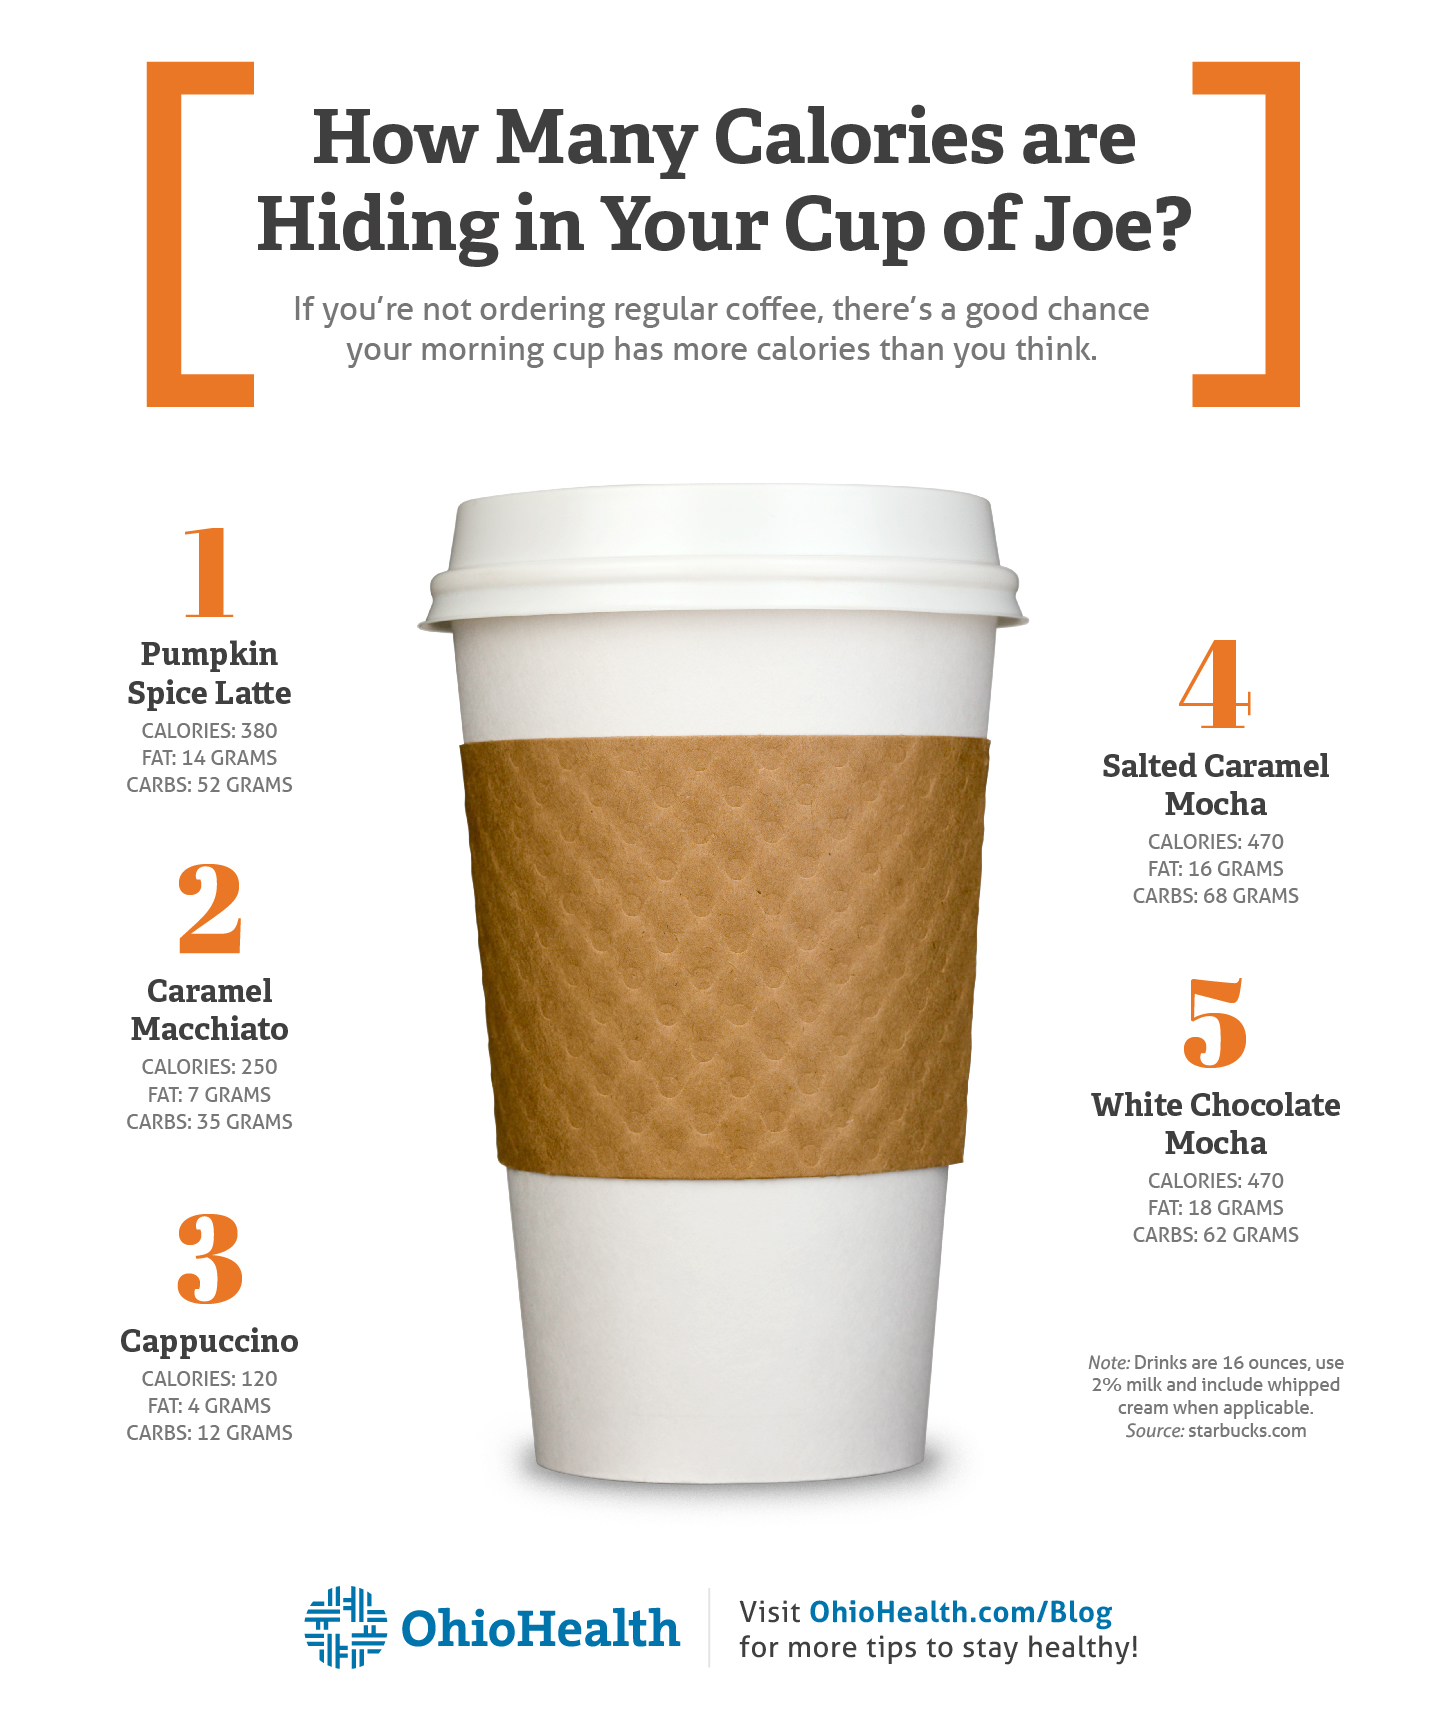 Infographic showing the calories, fat grams and carb grams in popular coffee drinks